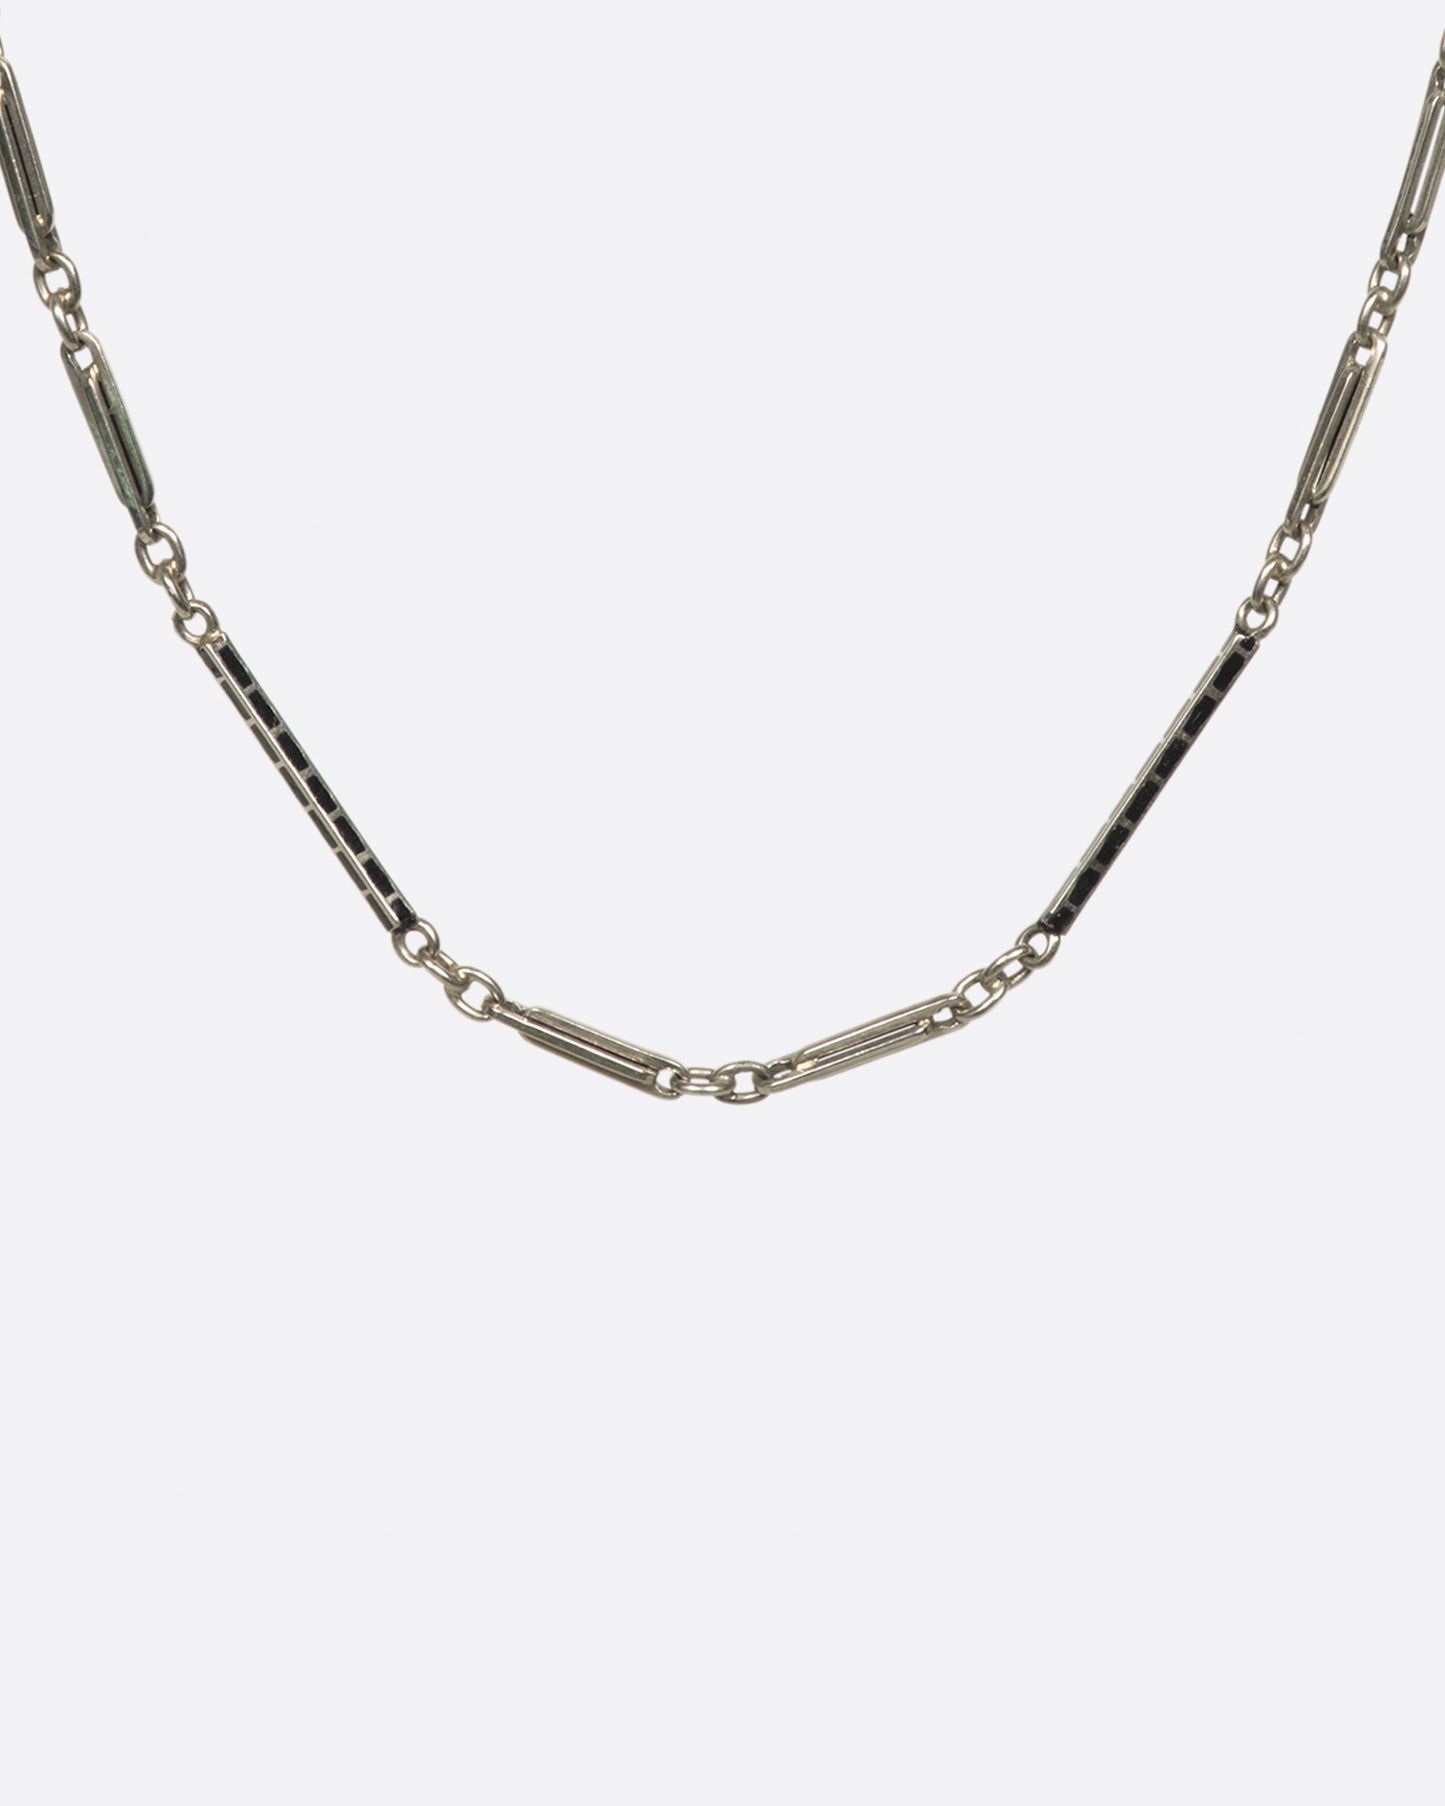 A vintage 14K white gold bar-link chain necklace with black enamel alternating throughout. Measuring just under 14 inches, this a dainty choker for someone with a slender neck.